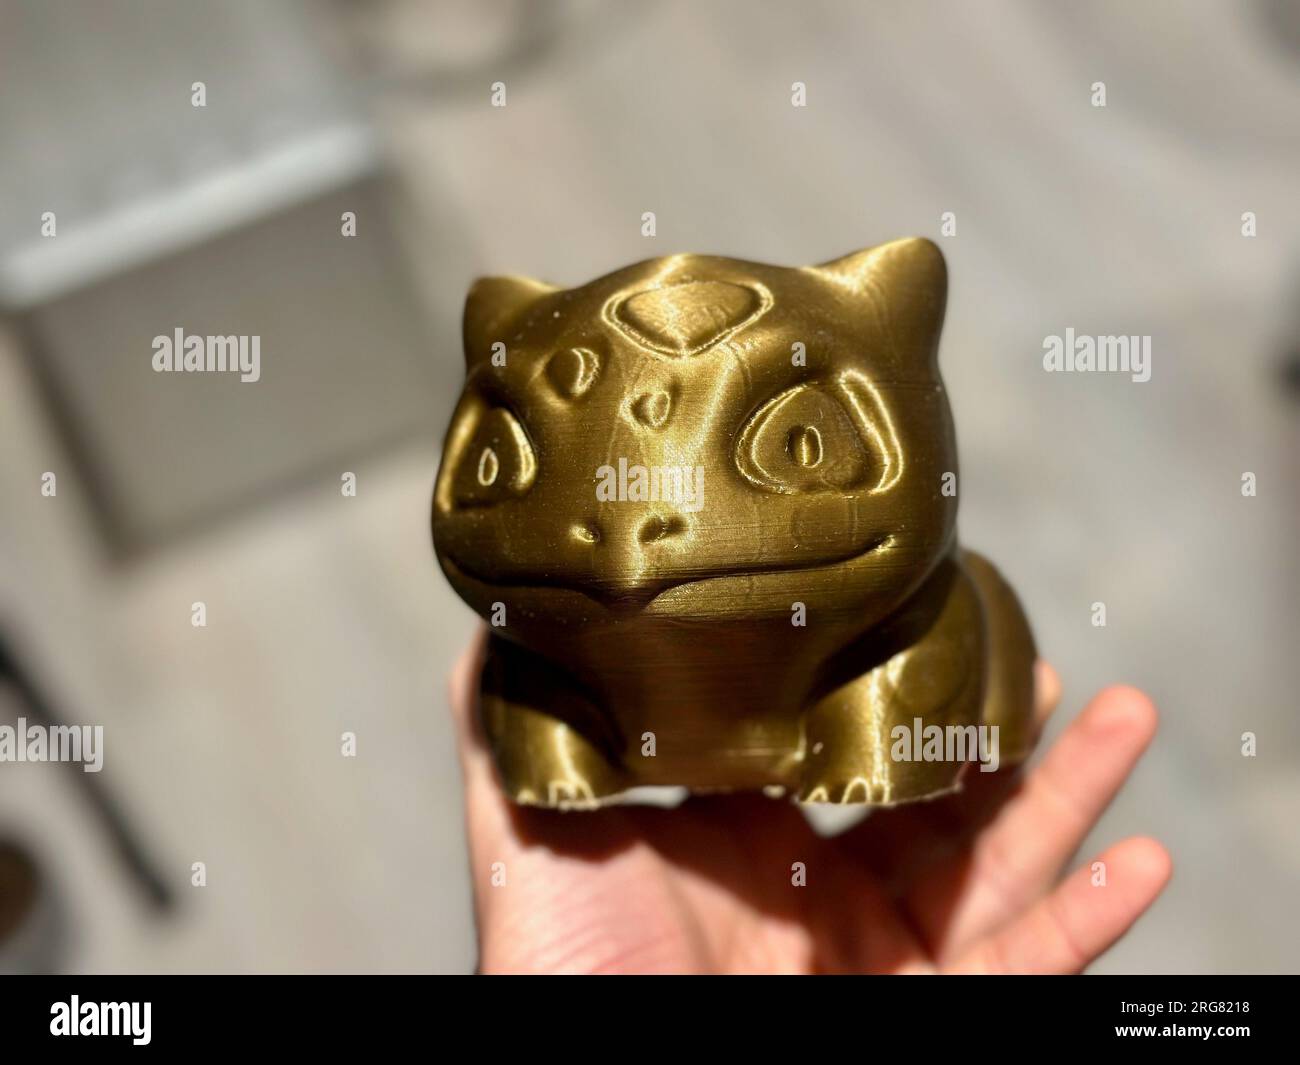 The Technological Alchemy: A 3D Printed Golden Bulbasaur Figurine - Fusion of Fantasy and Reality, A Cultural Crossover Between Cartoon and Material W Stock Photo